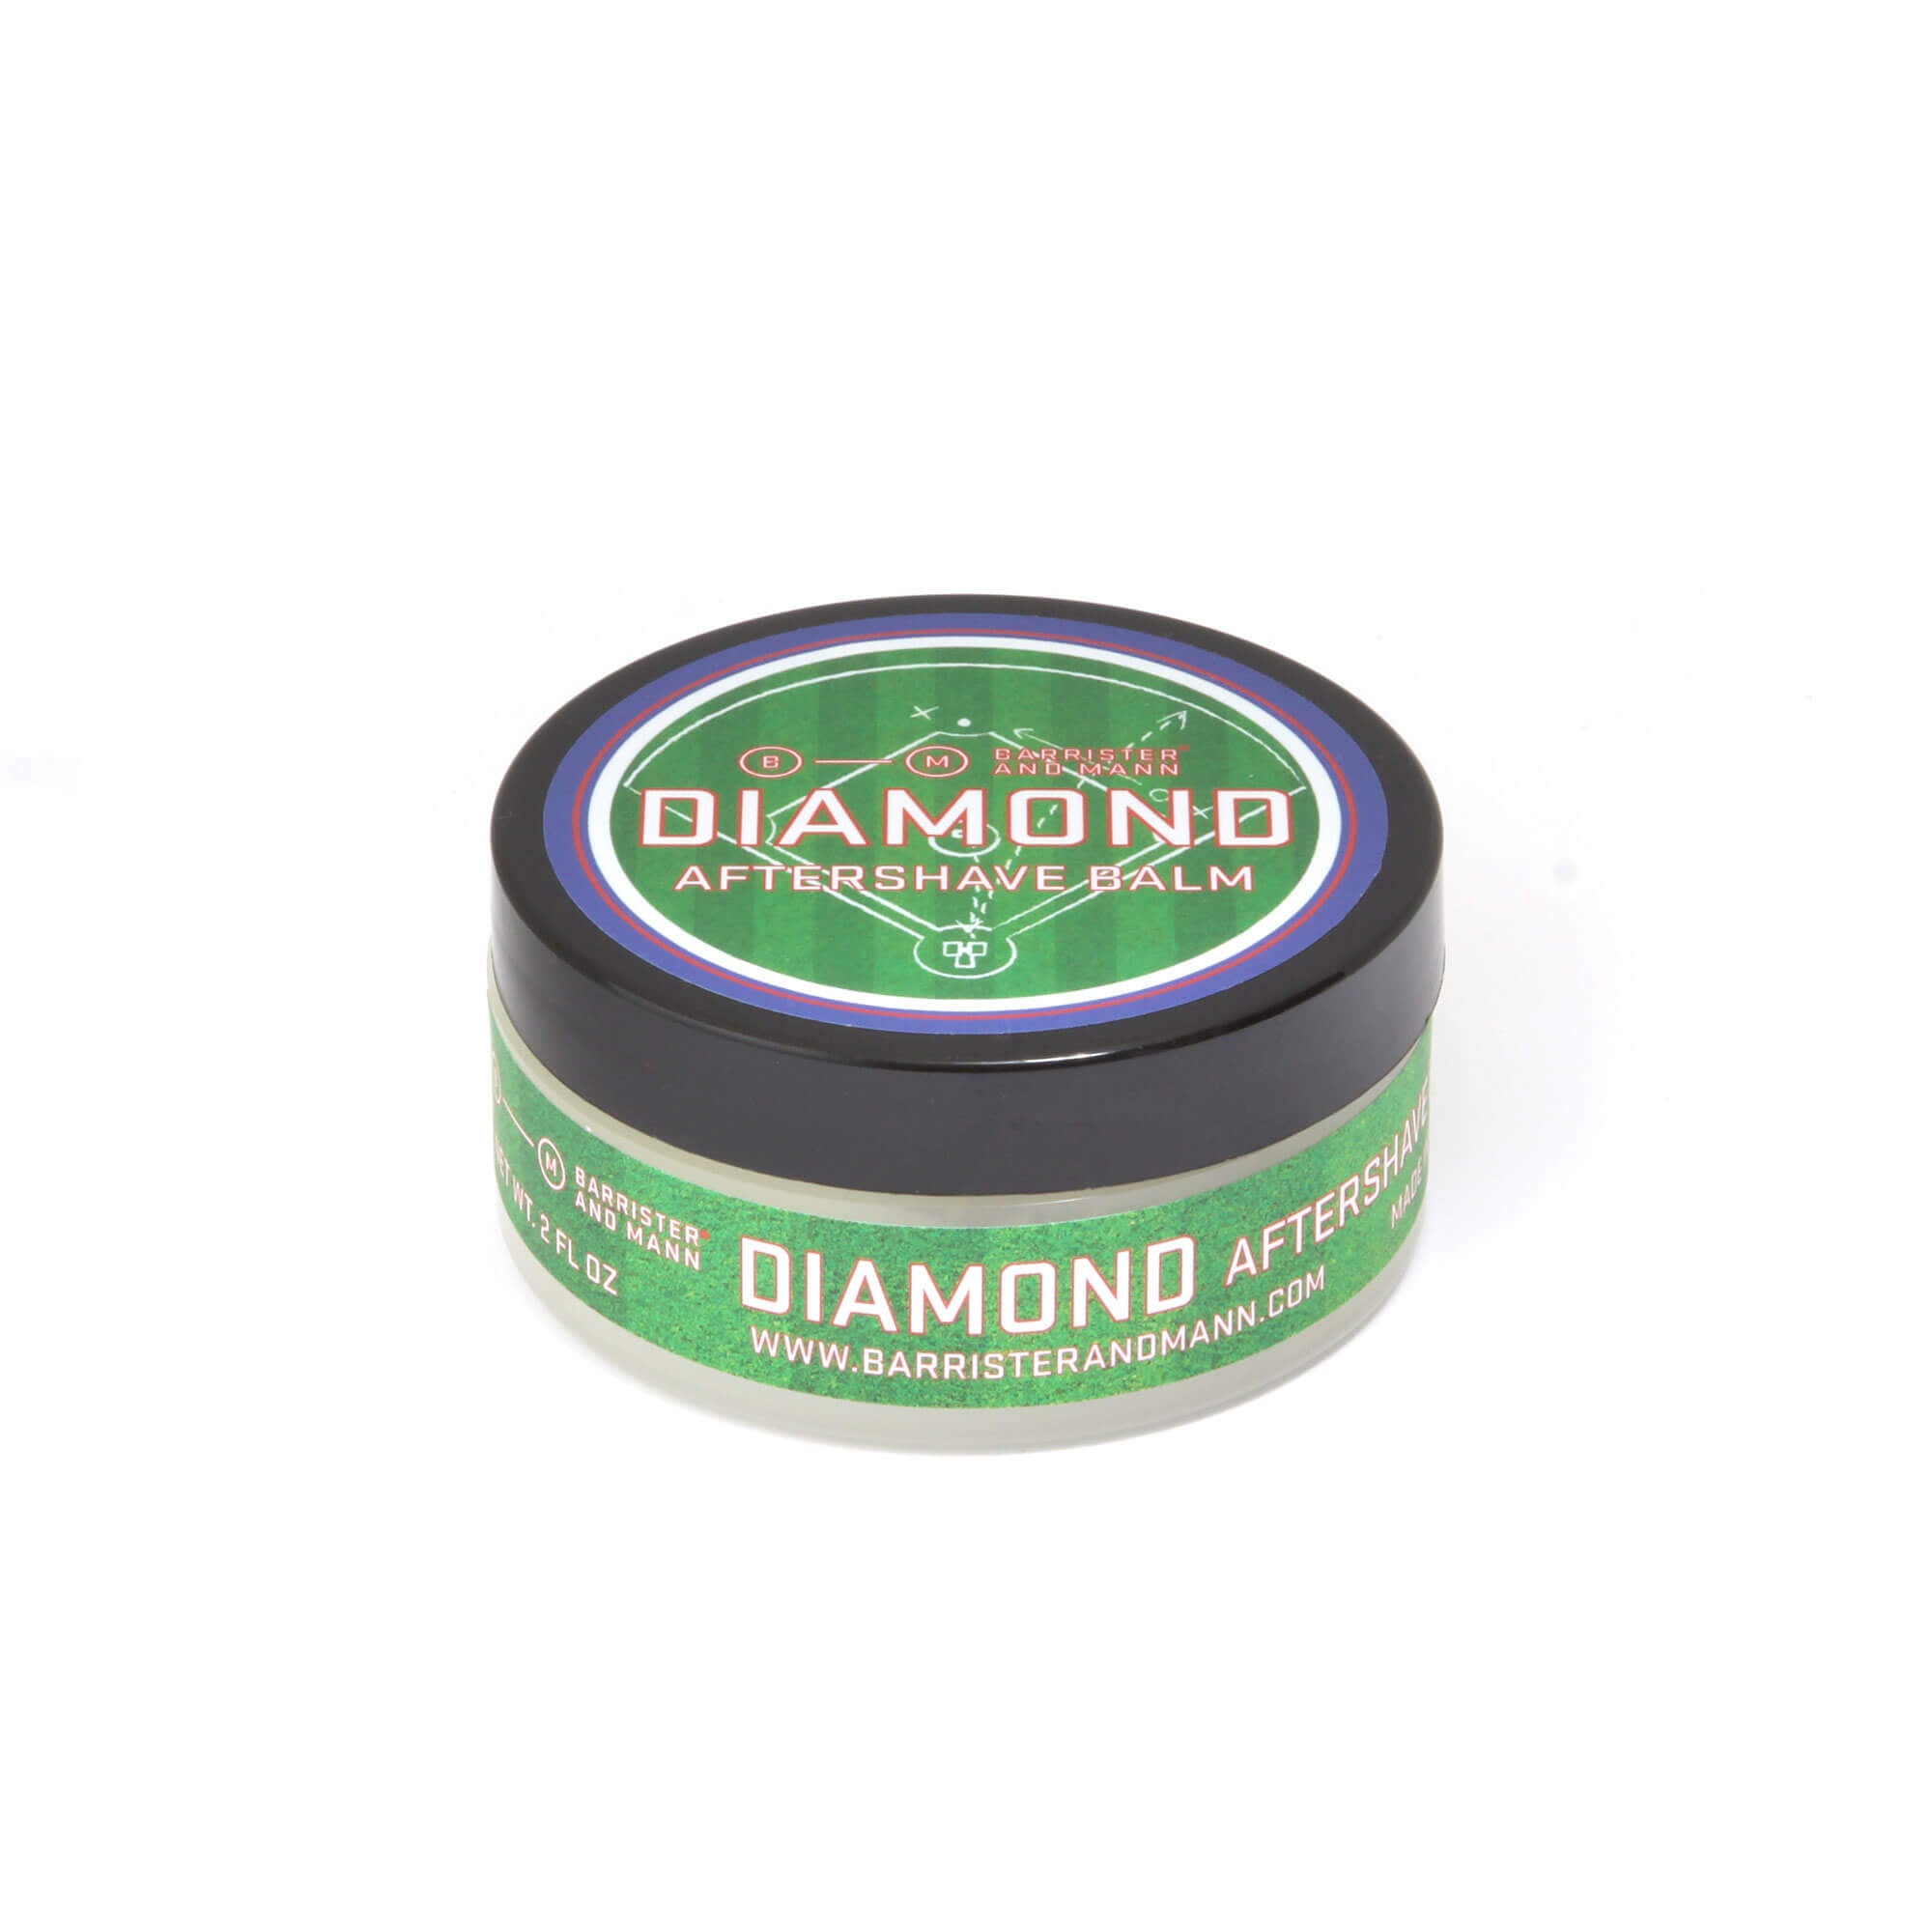 Barrister and Mann Diamond Aftershave Balm